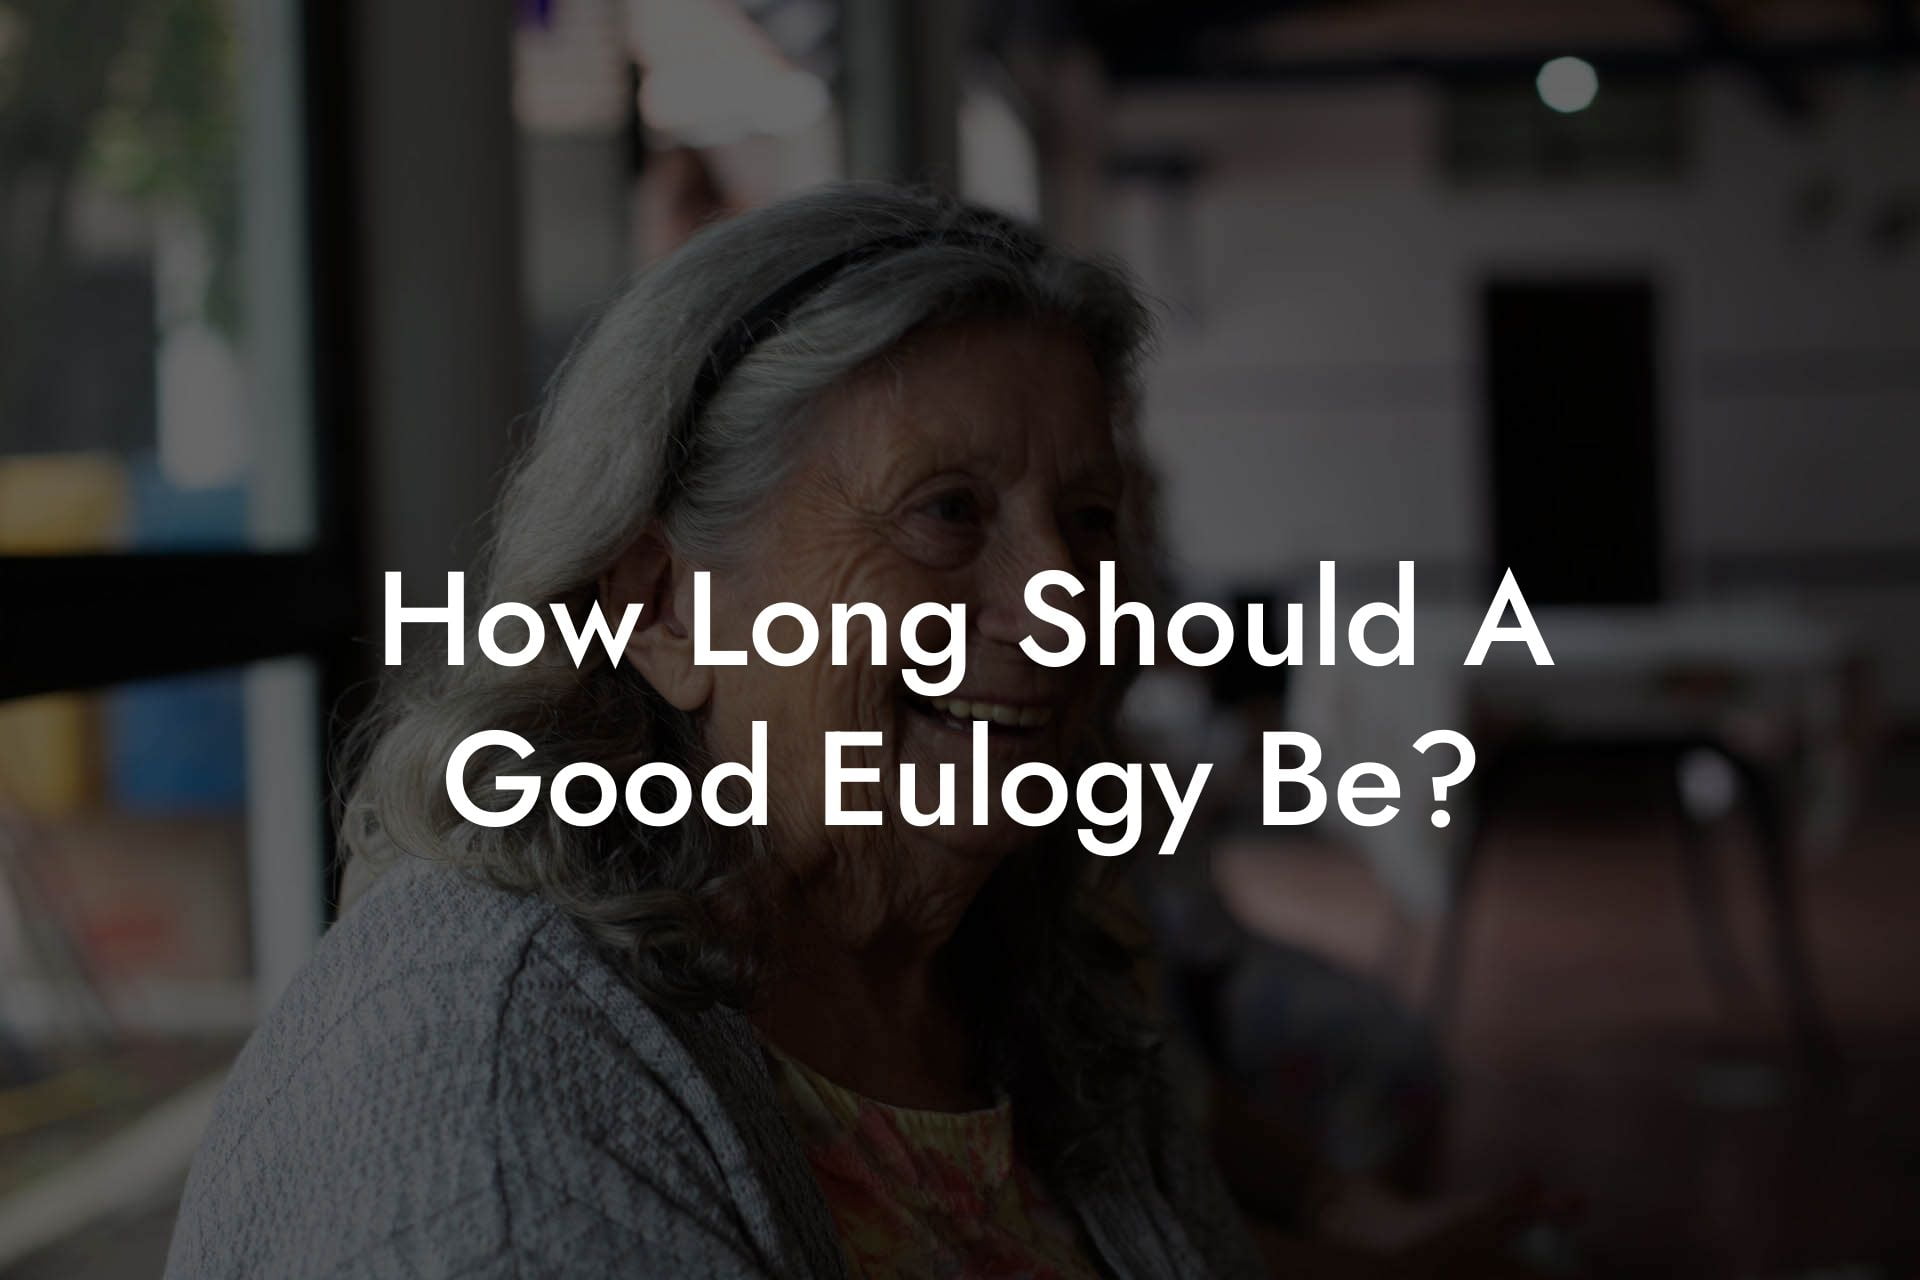 How Long Should A Good Eulogy Be?